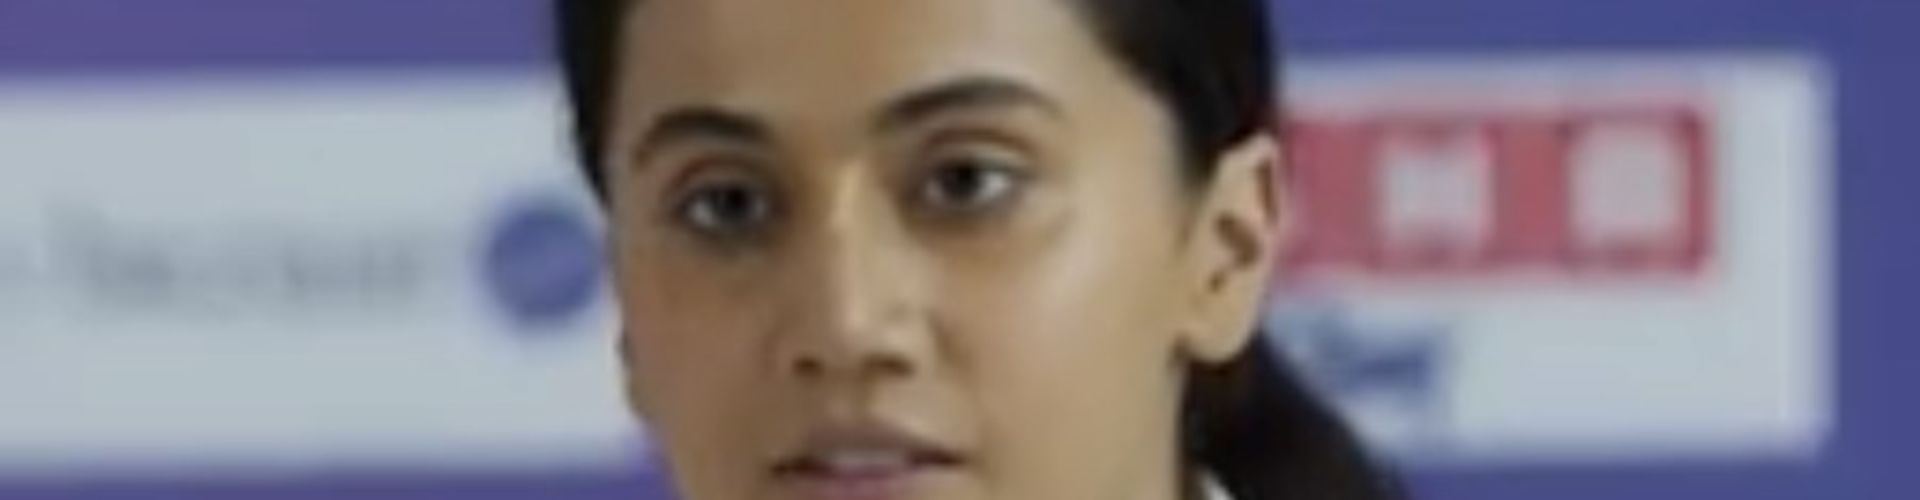 Taapsee Paanu As Mithali Raj In Shabaash Mithu, Trailer Is Out